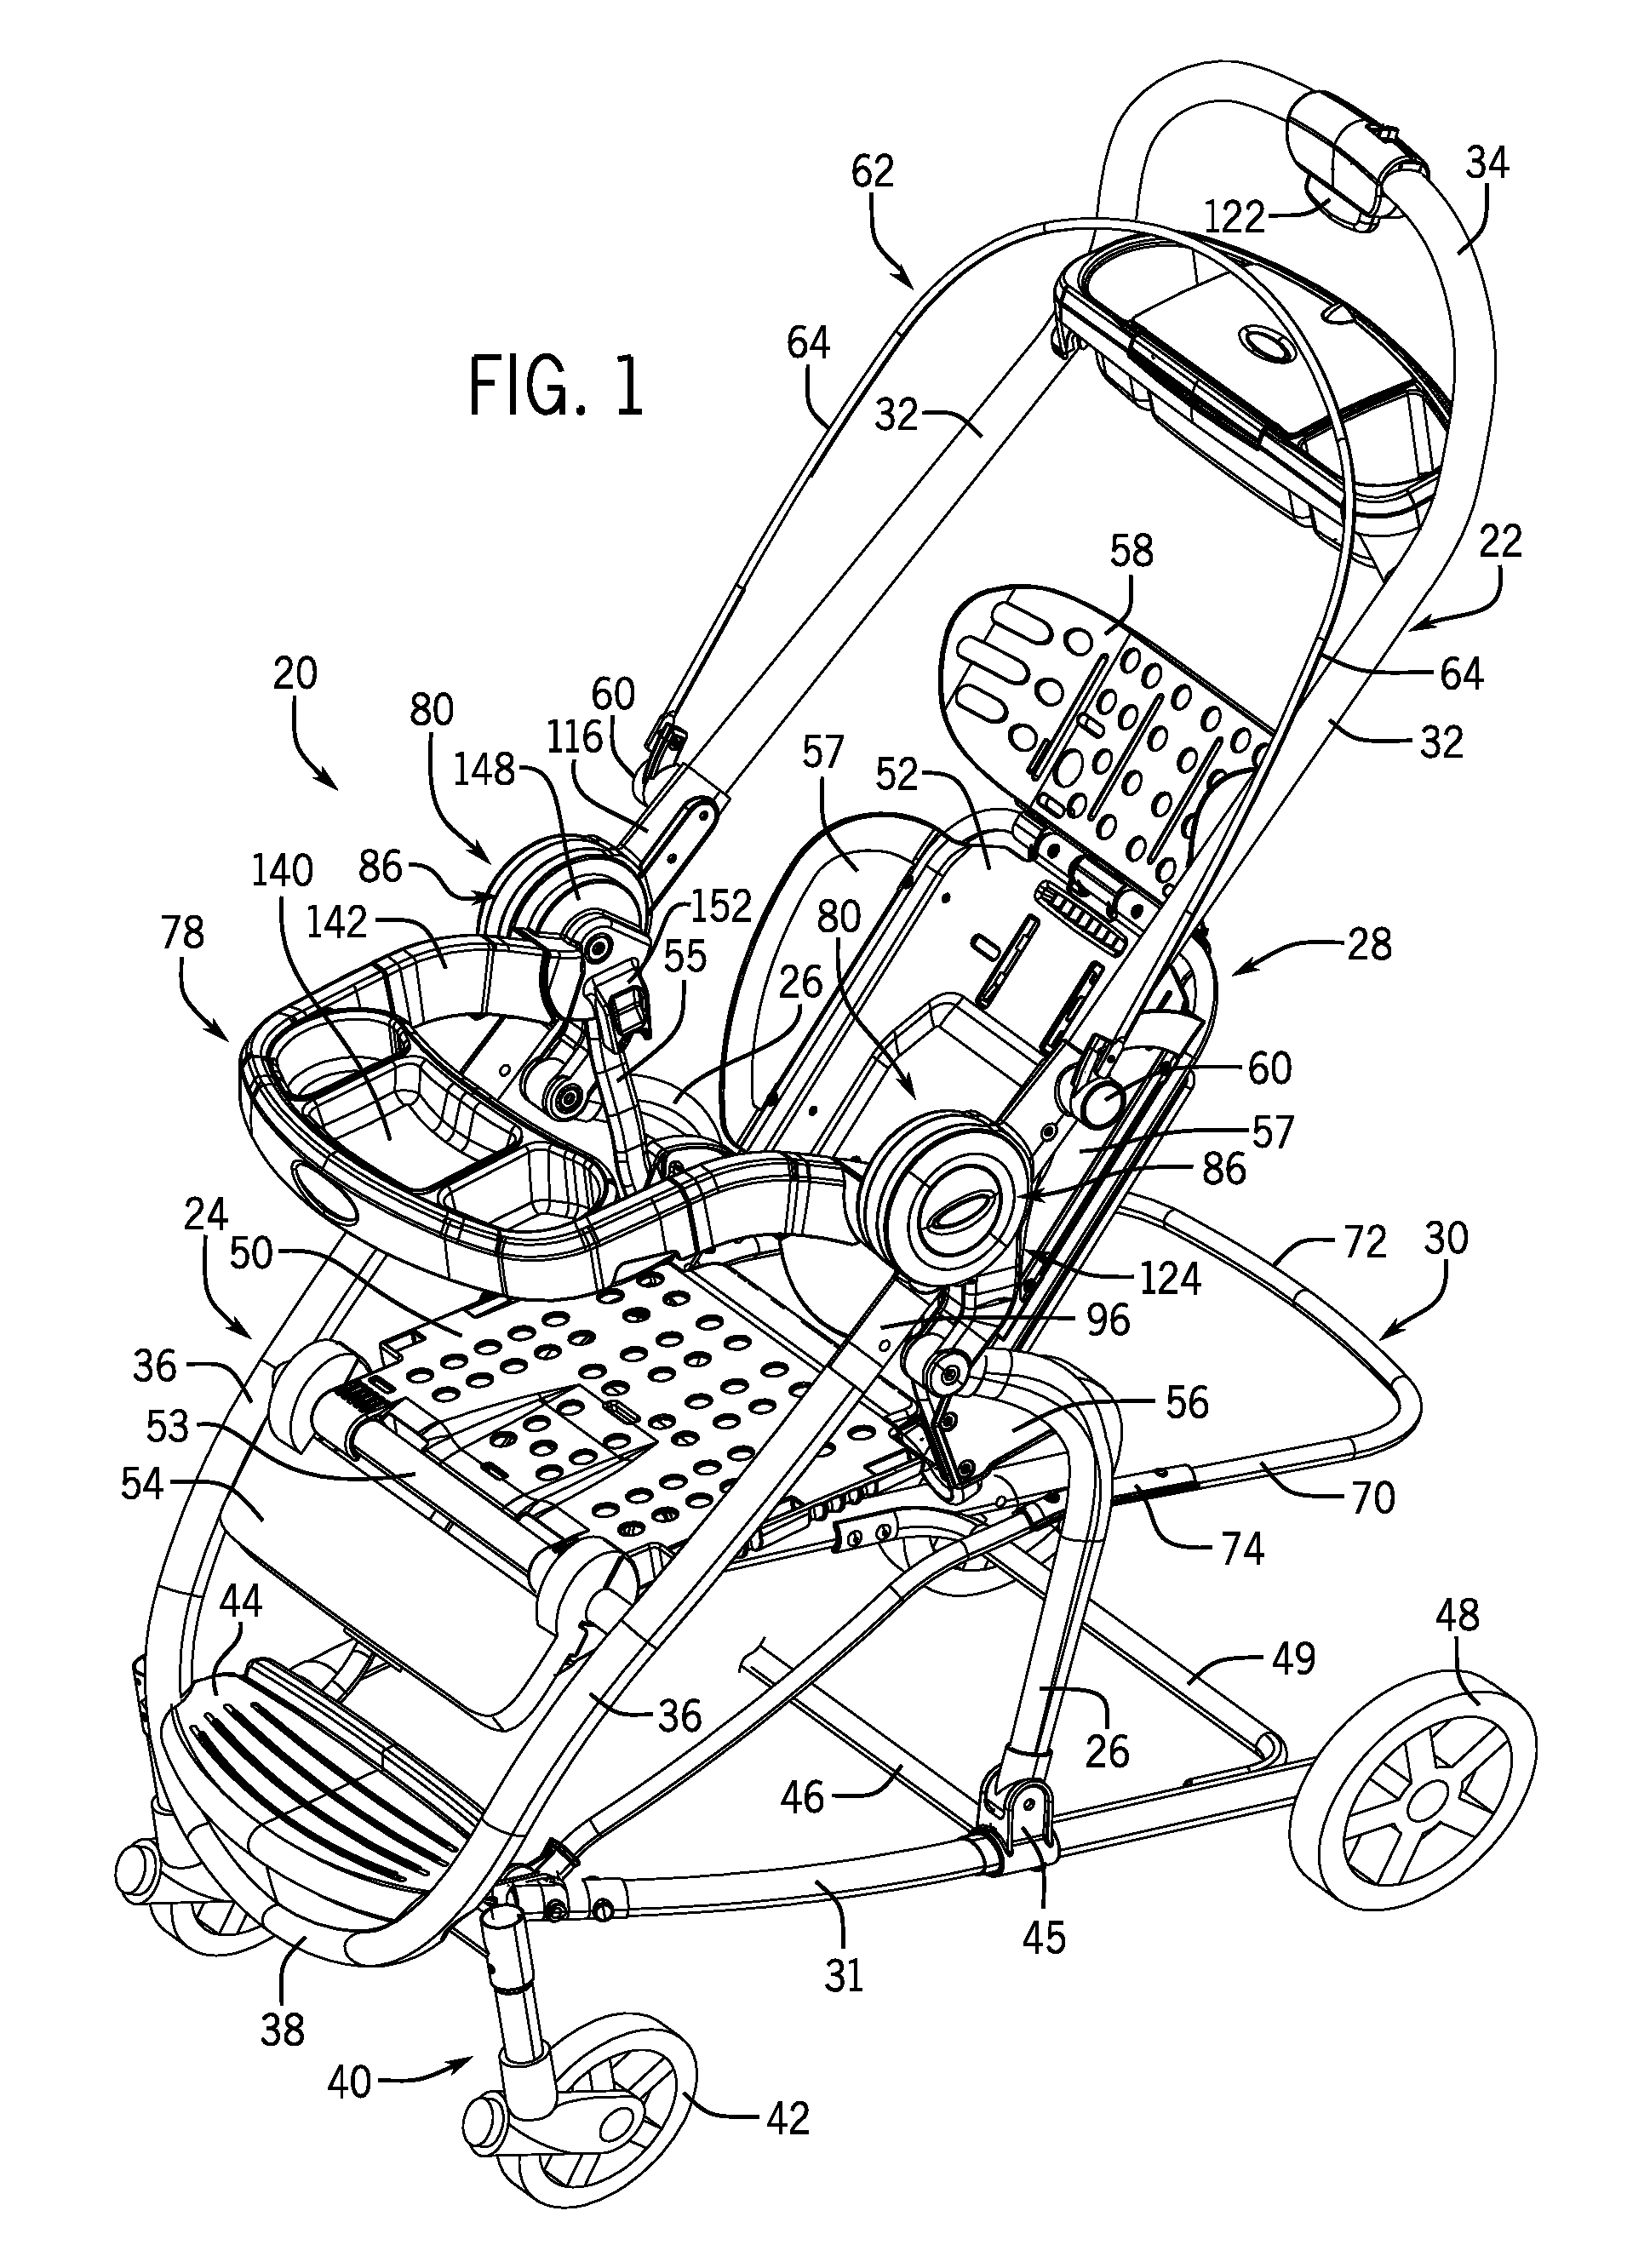 Foldable stroller and automatic folding tray for same